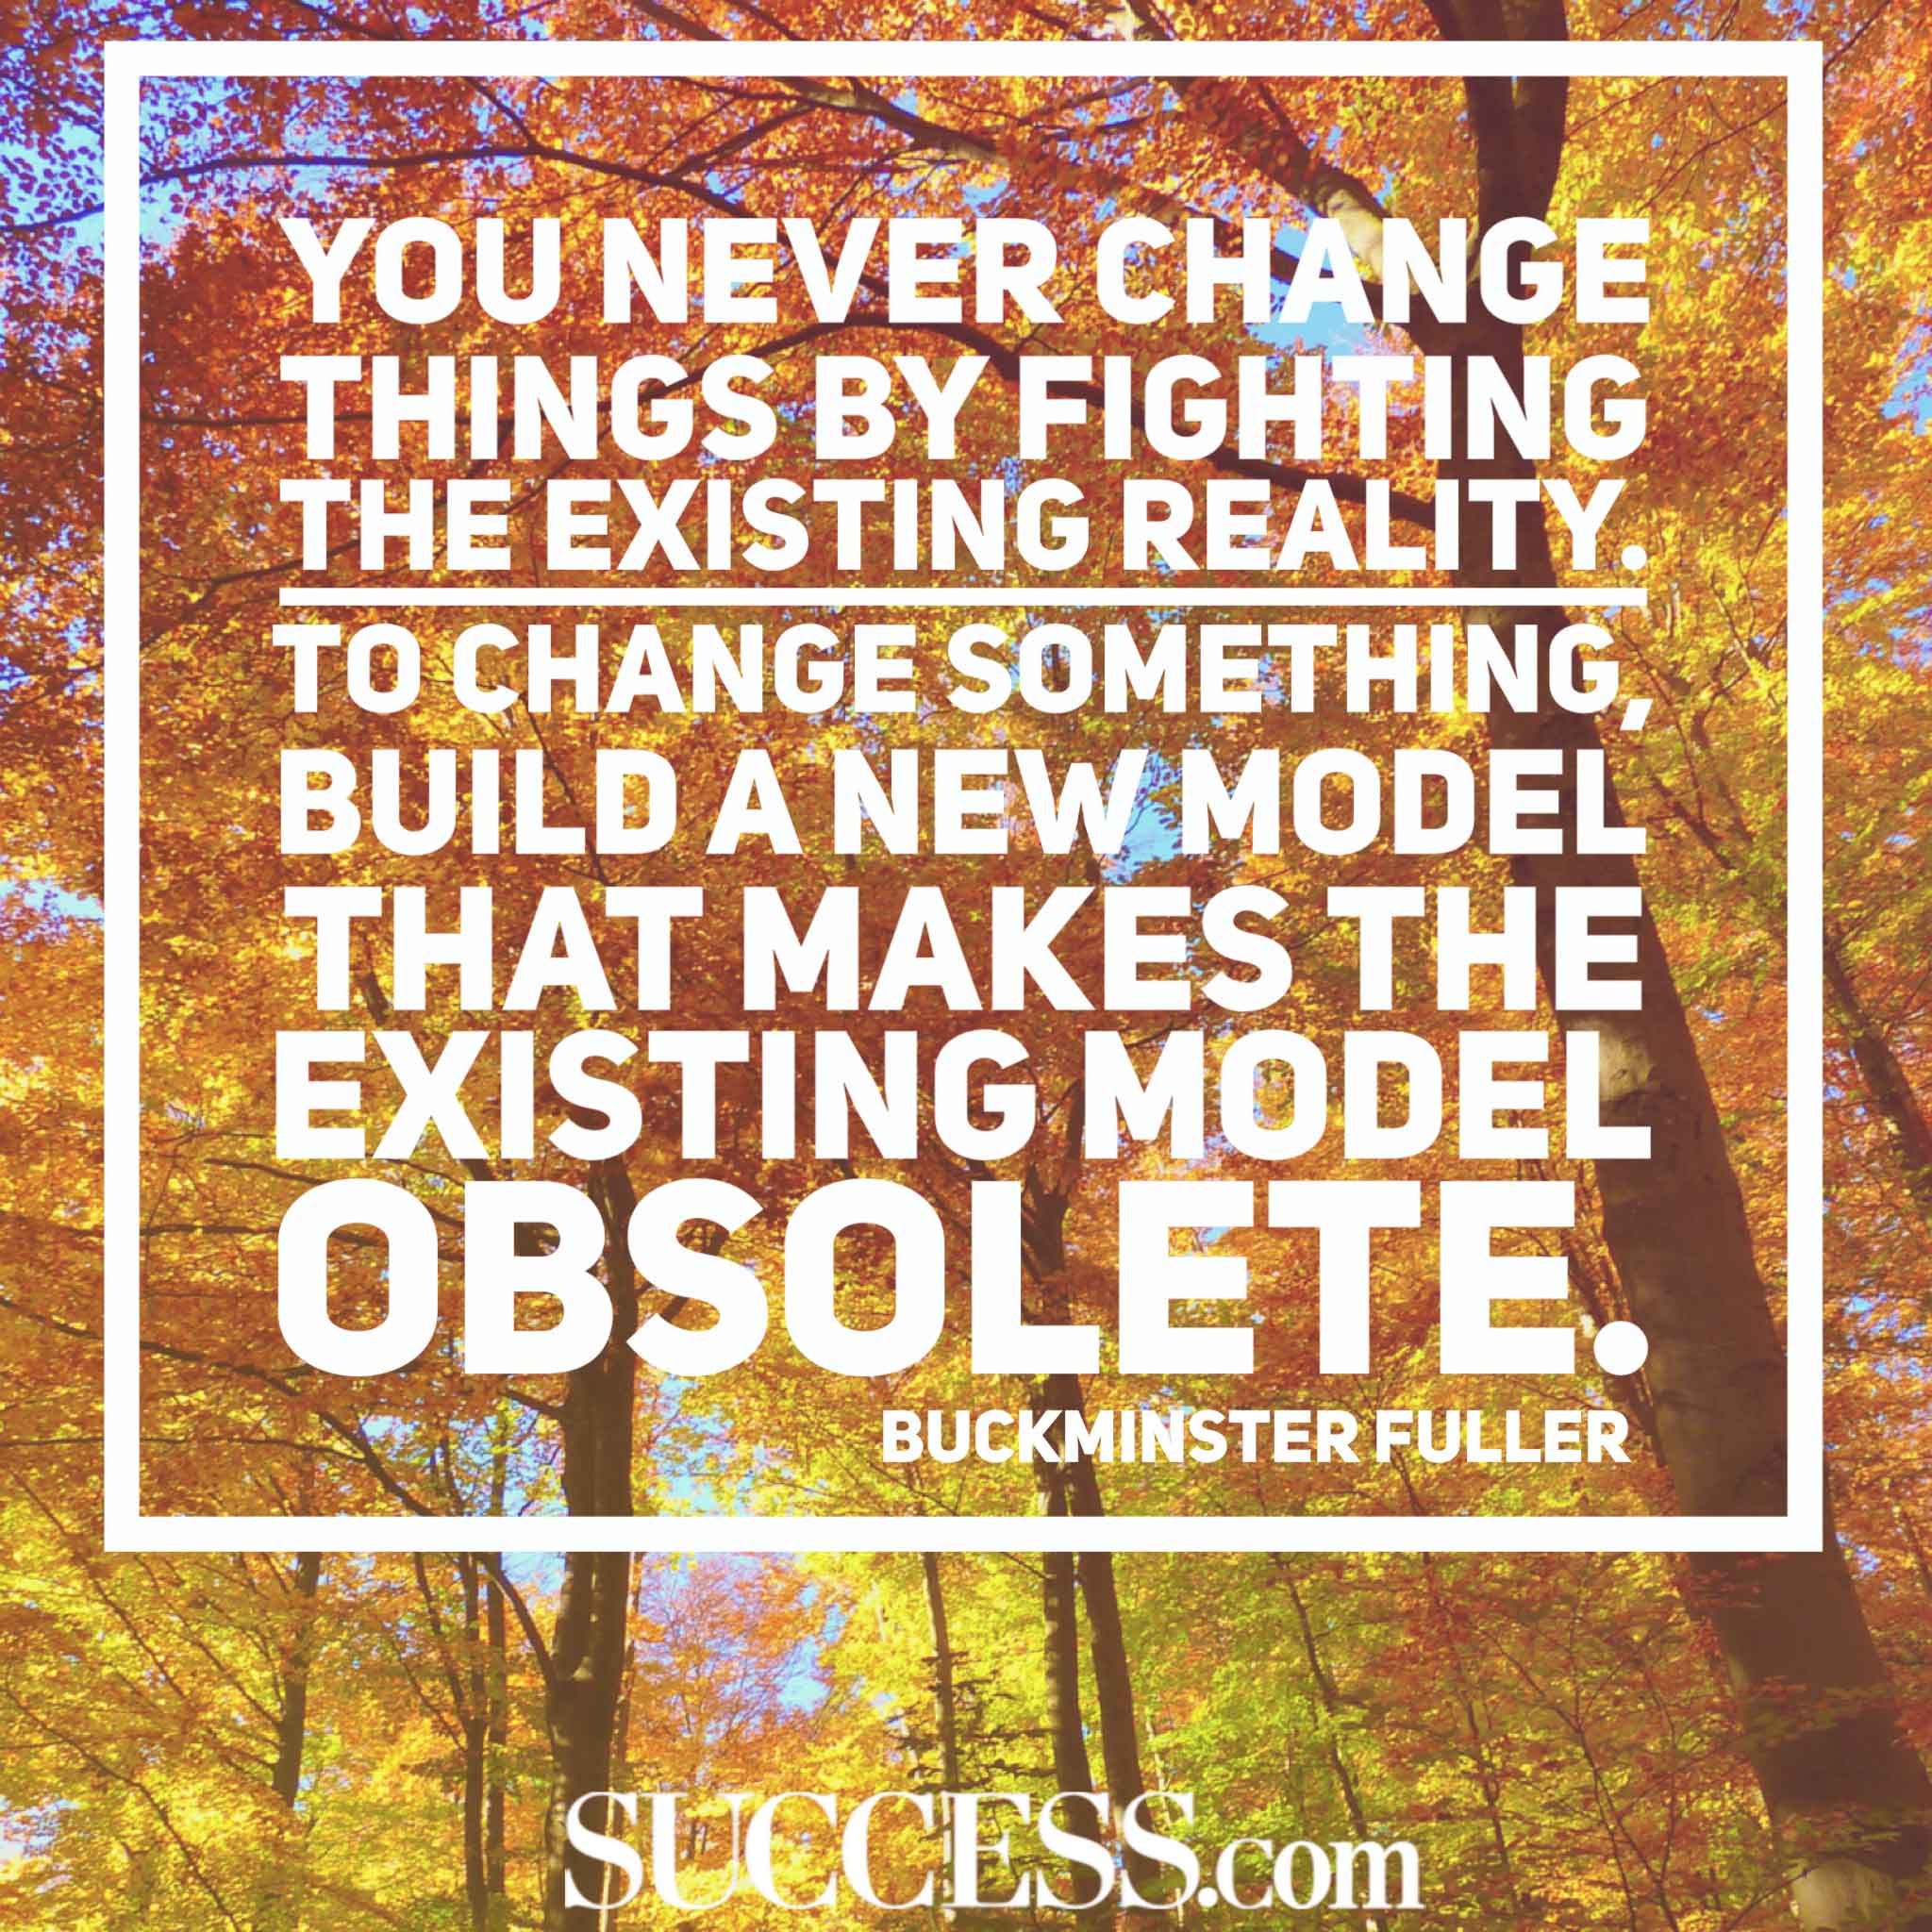 21 Insightful Quotes About Embracing Change | SUCCESS